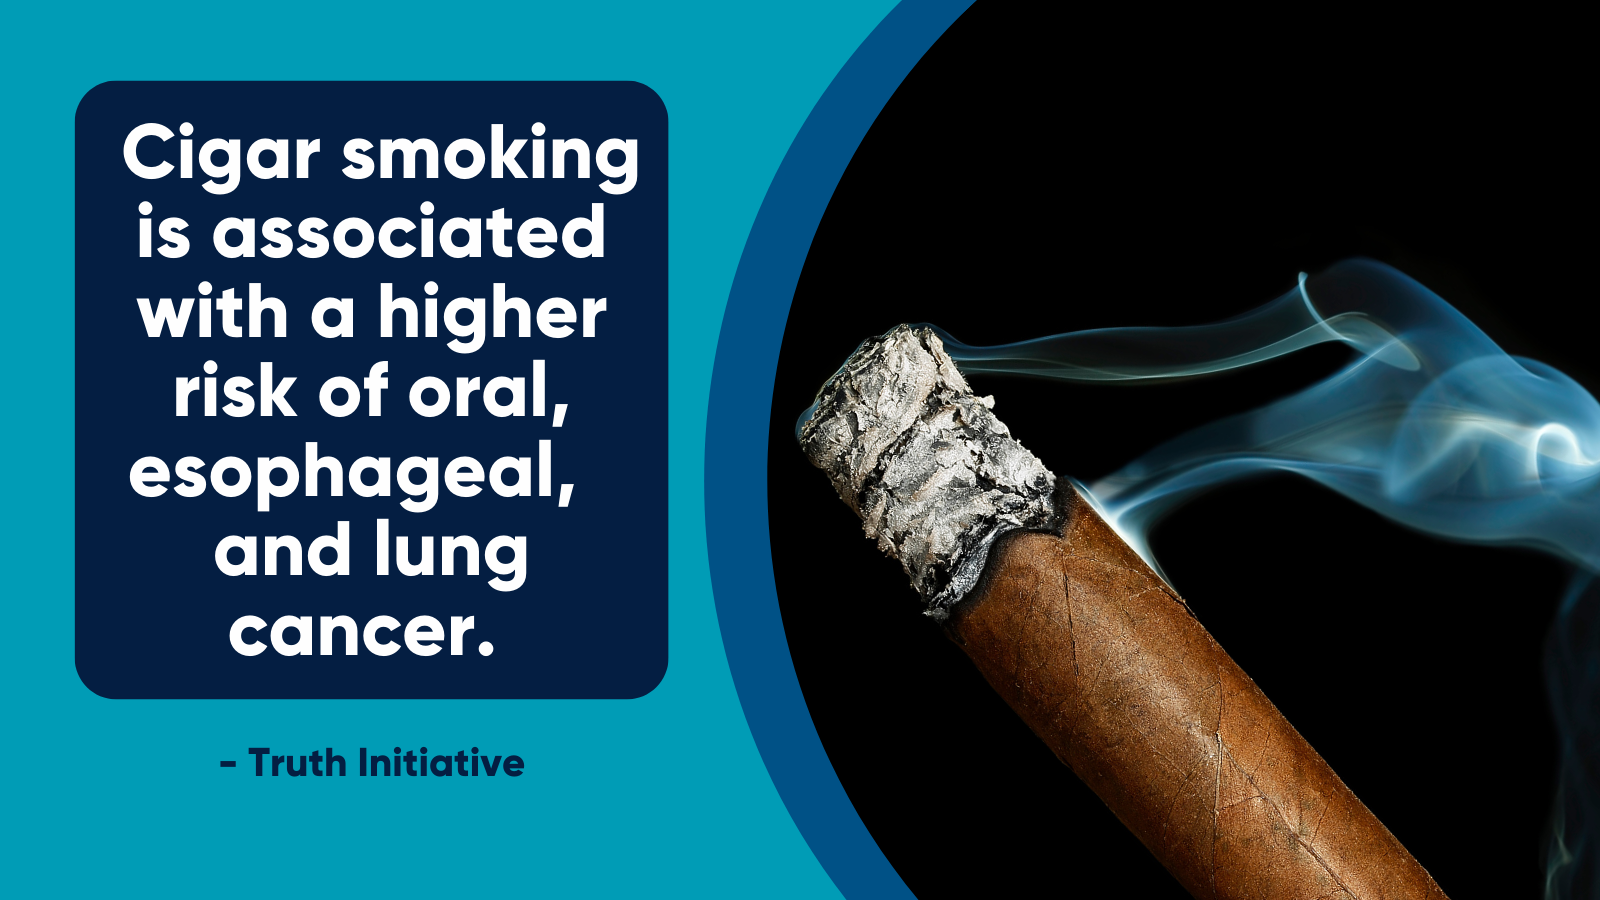 "Cigar smoking is associated with a higher risk of oral, esophageal, and lung cancer." Truth Initiative